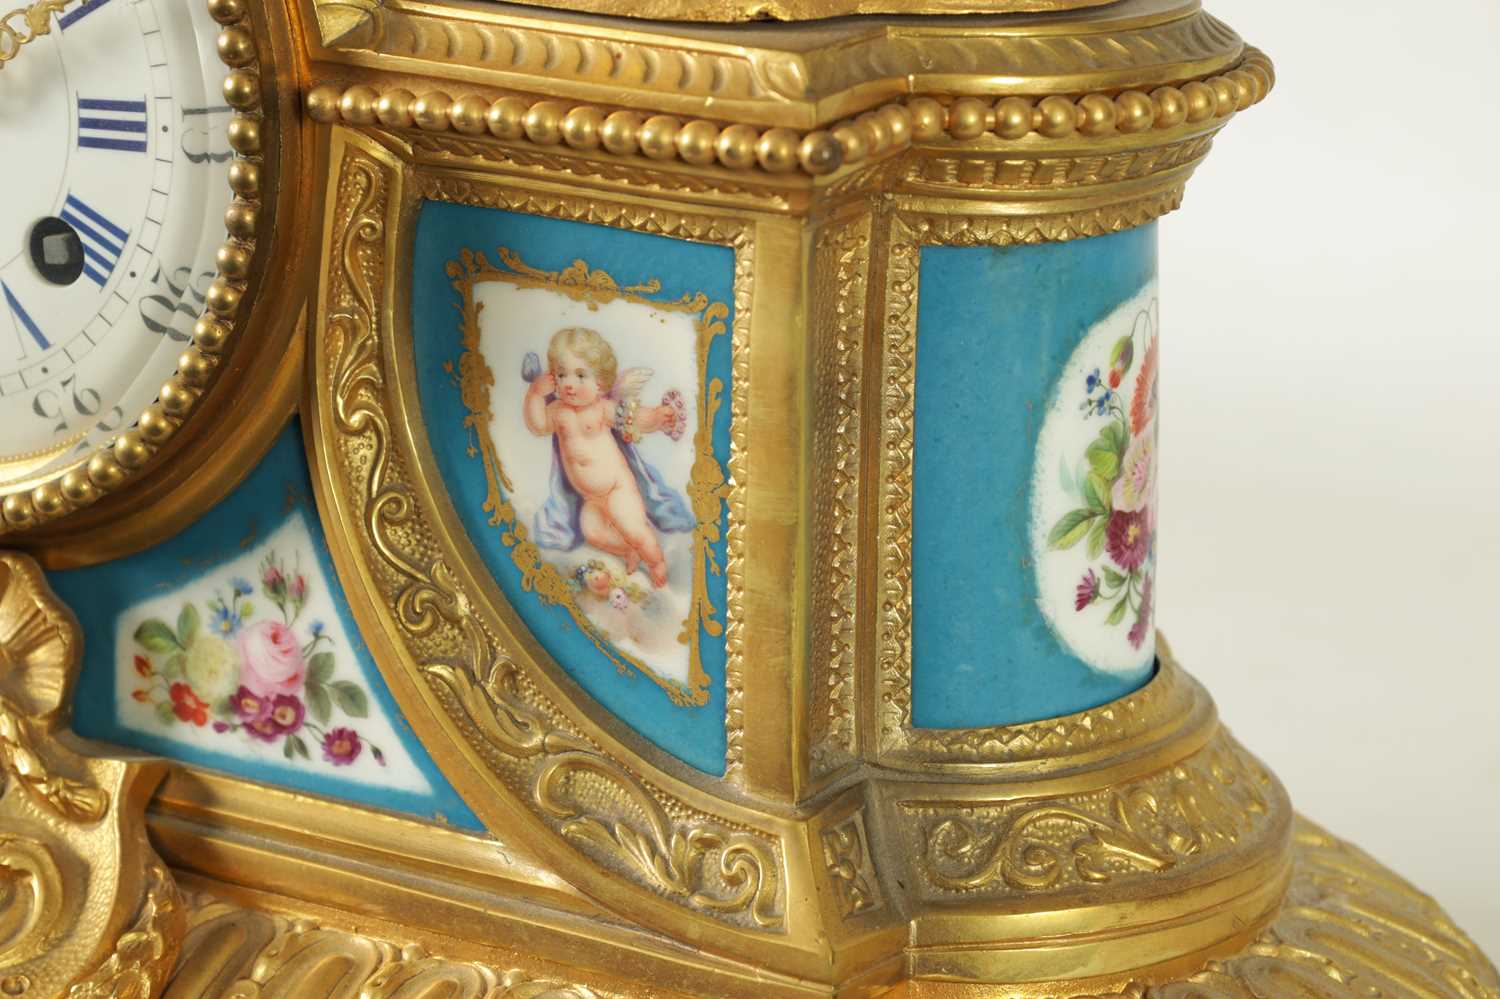 CHARLES OUDIN, A PARIS. A LATE 19TH CENTURY FRENCH ORMOLU AND PORCELAIN PANELLED MANTEL CLOCK - Image 6 of 11